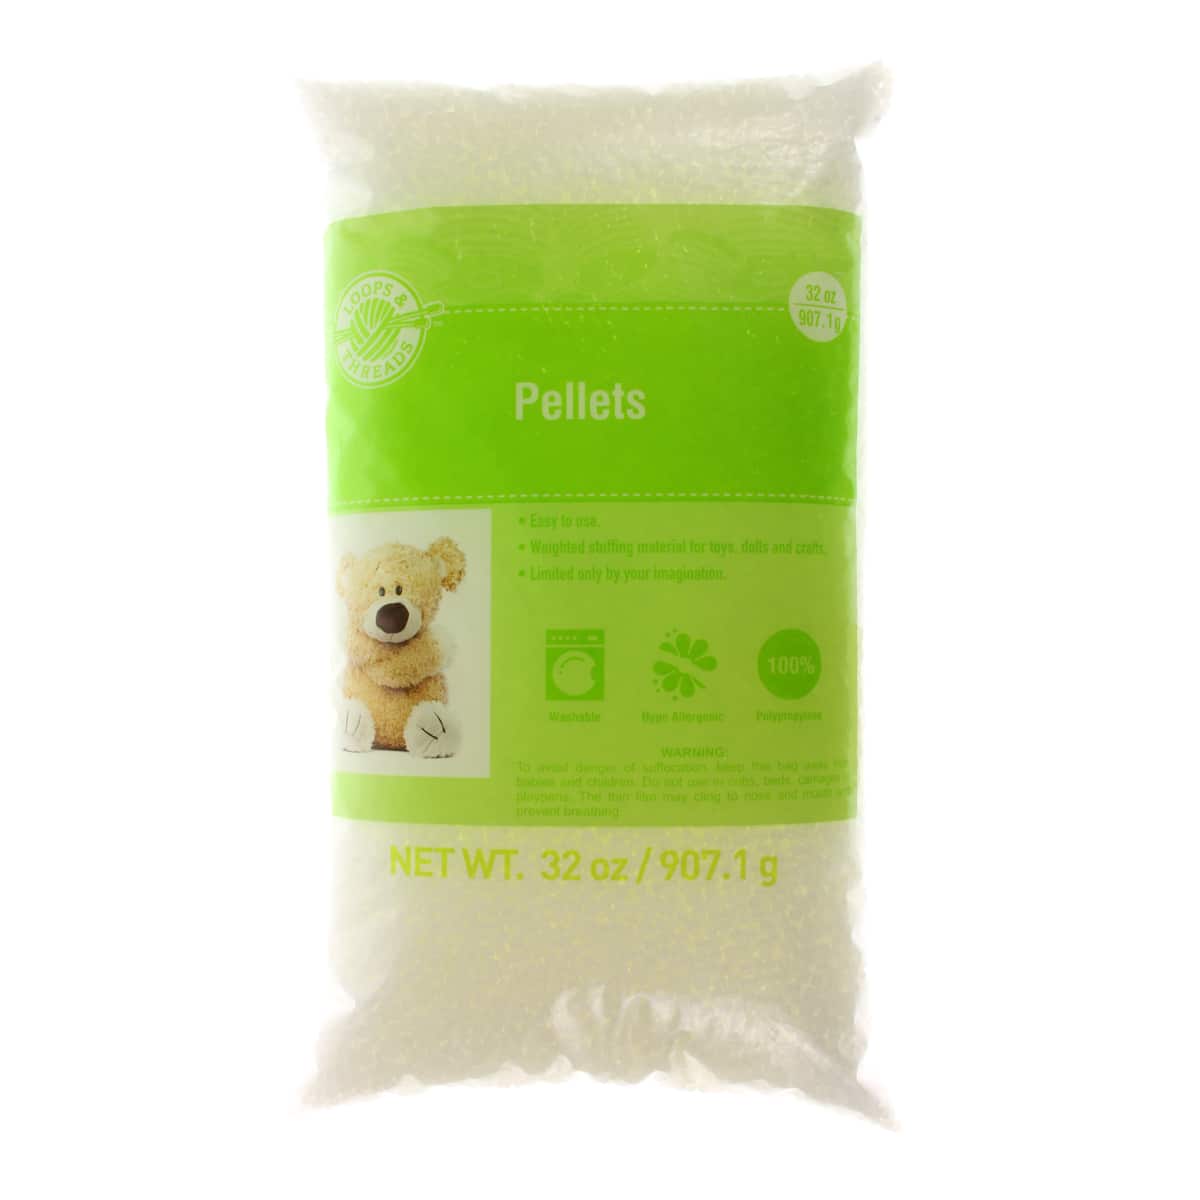 Poly pellets weighted stuffing beads plush crafting sewing blanket - arts &  crafts - by owner - sale - craigslist